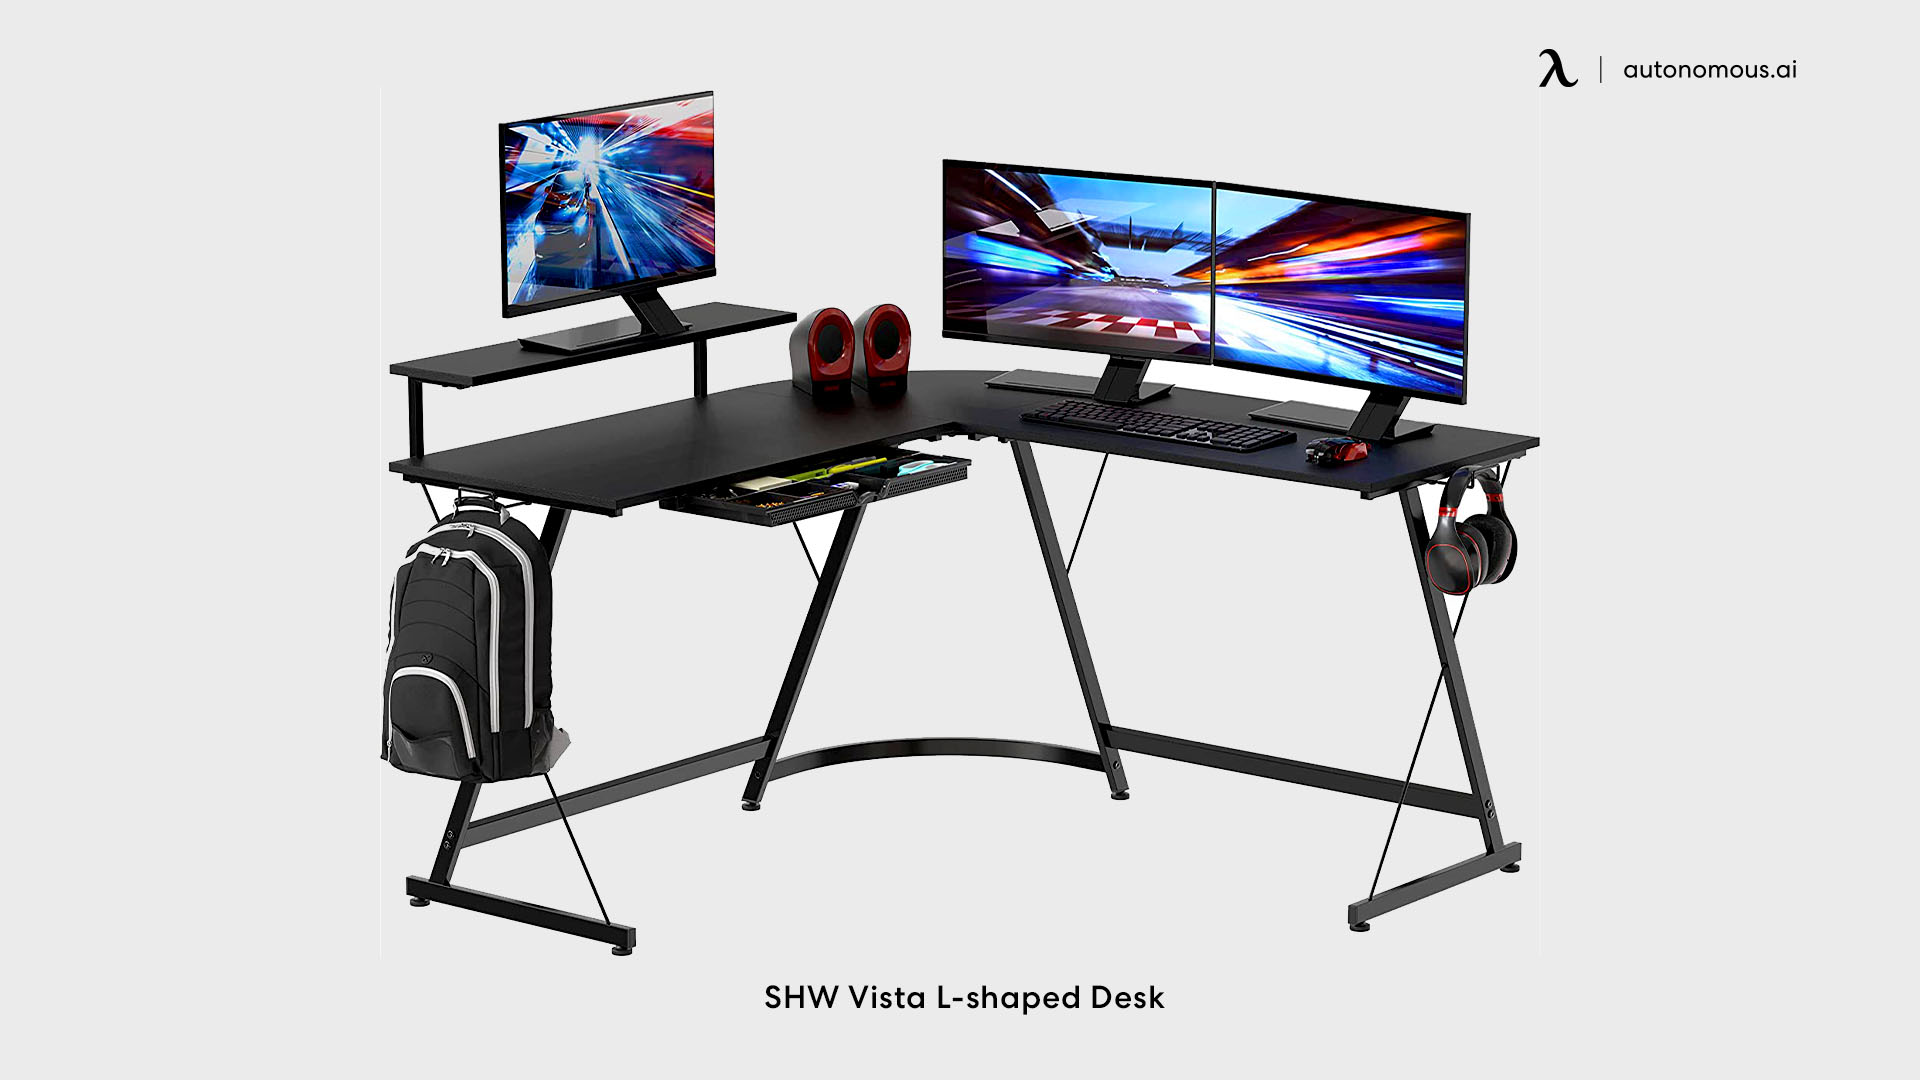 SHW Vista L-shaped Desk with Keyboard Trays and Monitor Stand